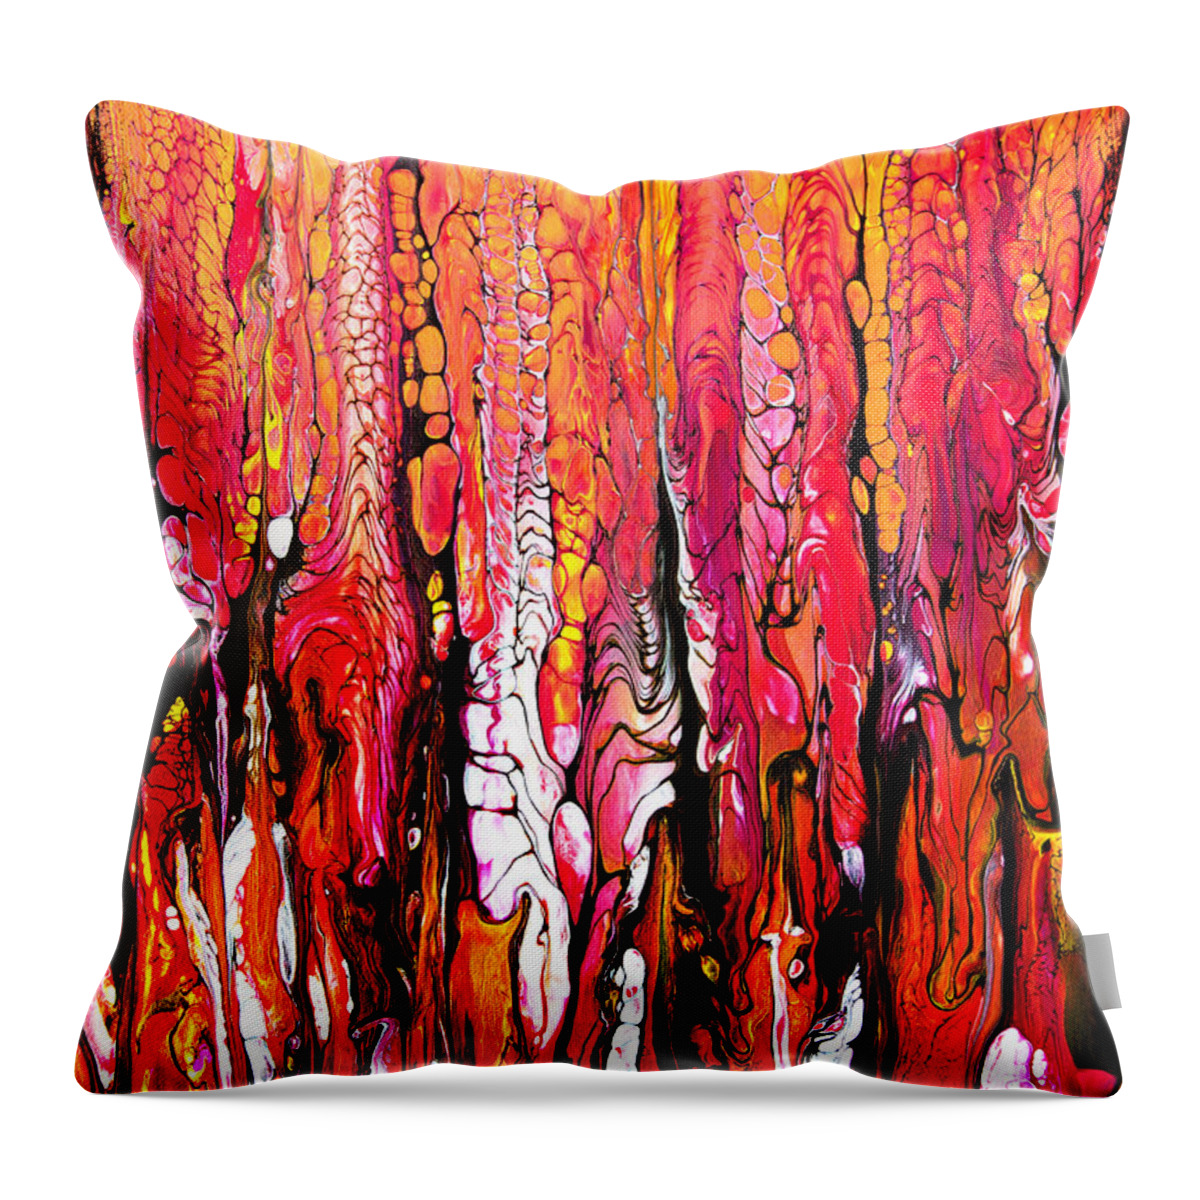 Fire Drama Compelling Vibrant Colorful Natural Abstract Hot Organic Red Orange Throw Pillow featuring the painting The Bonfire #2676 by Priscilla Batzell Expressionist Art Studio Gallery